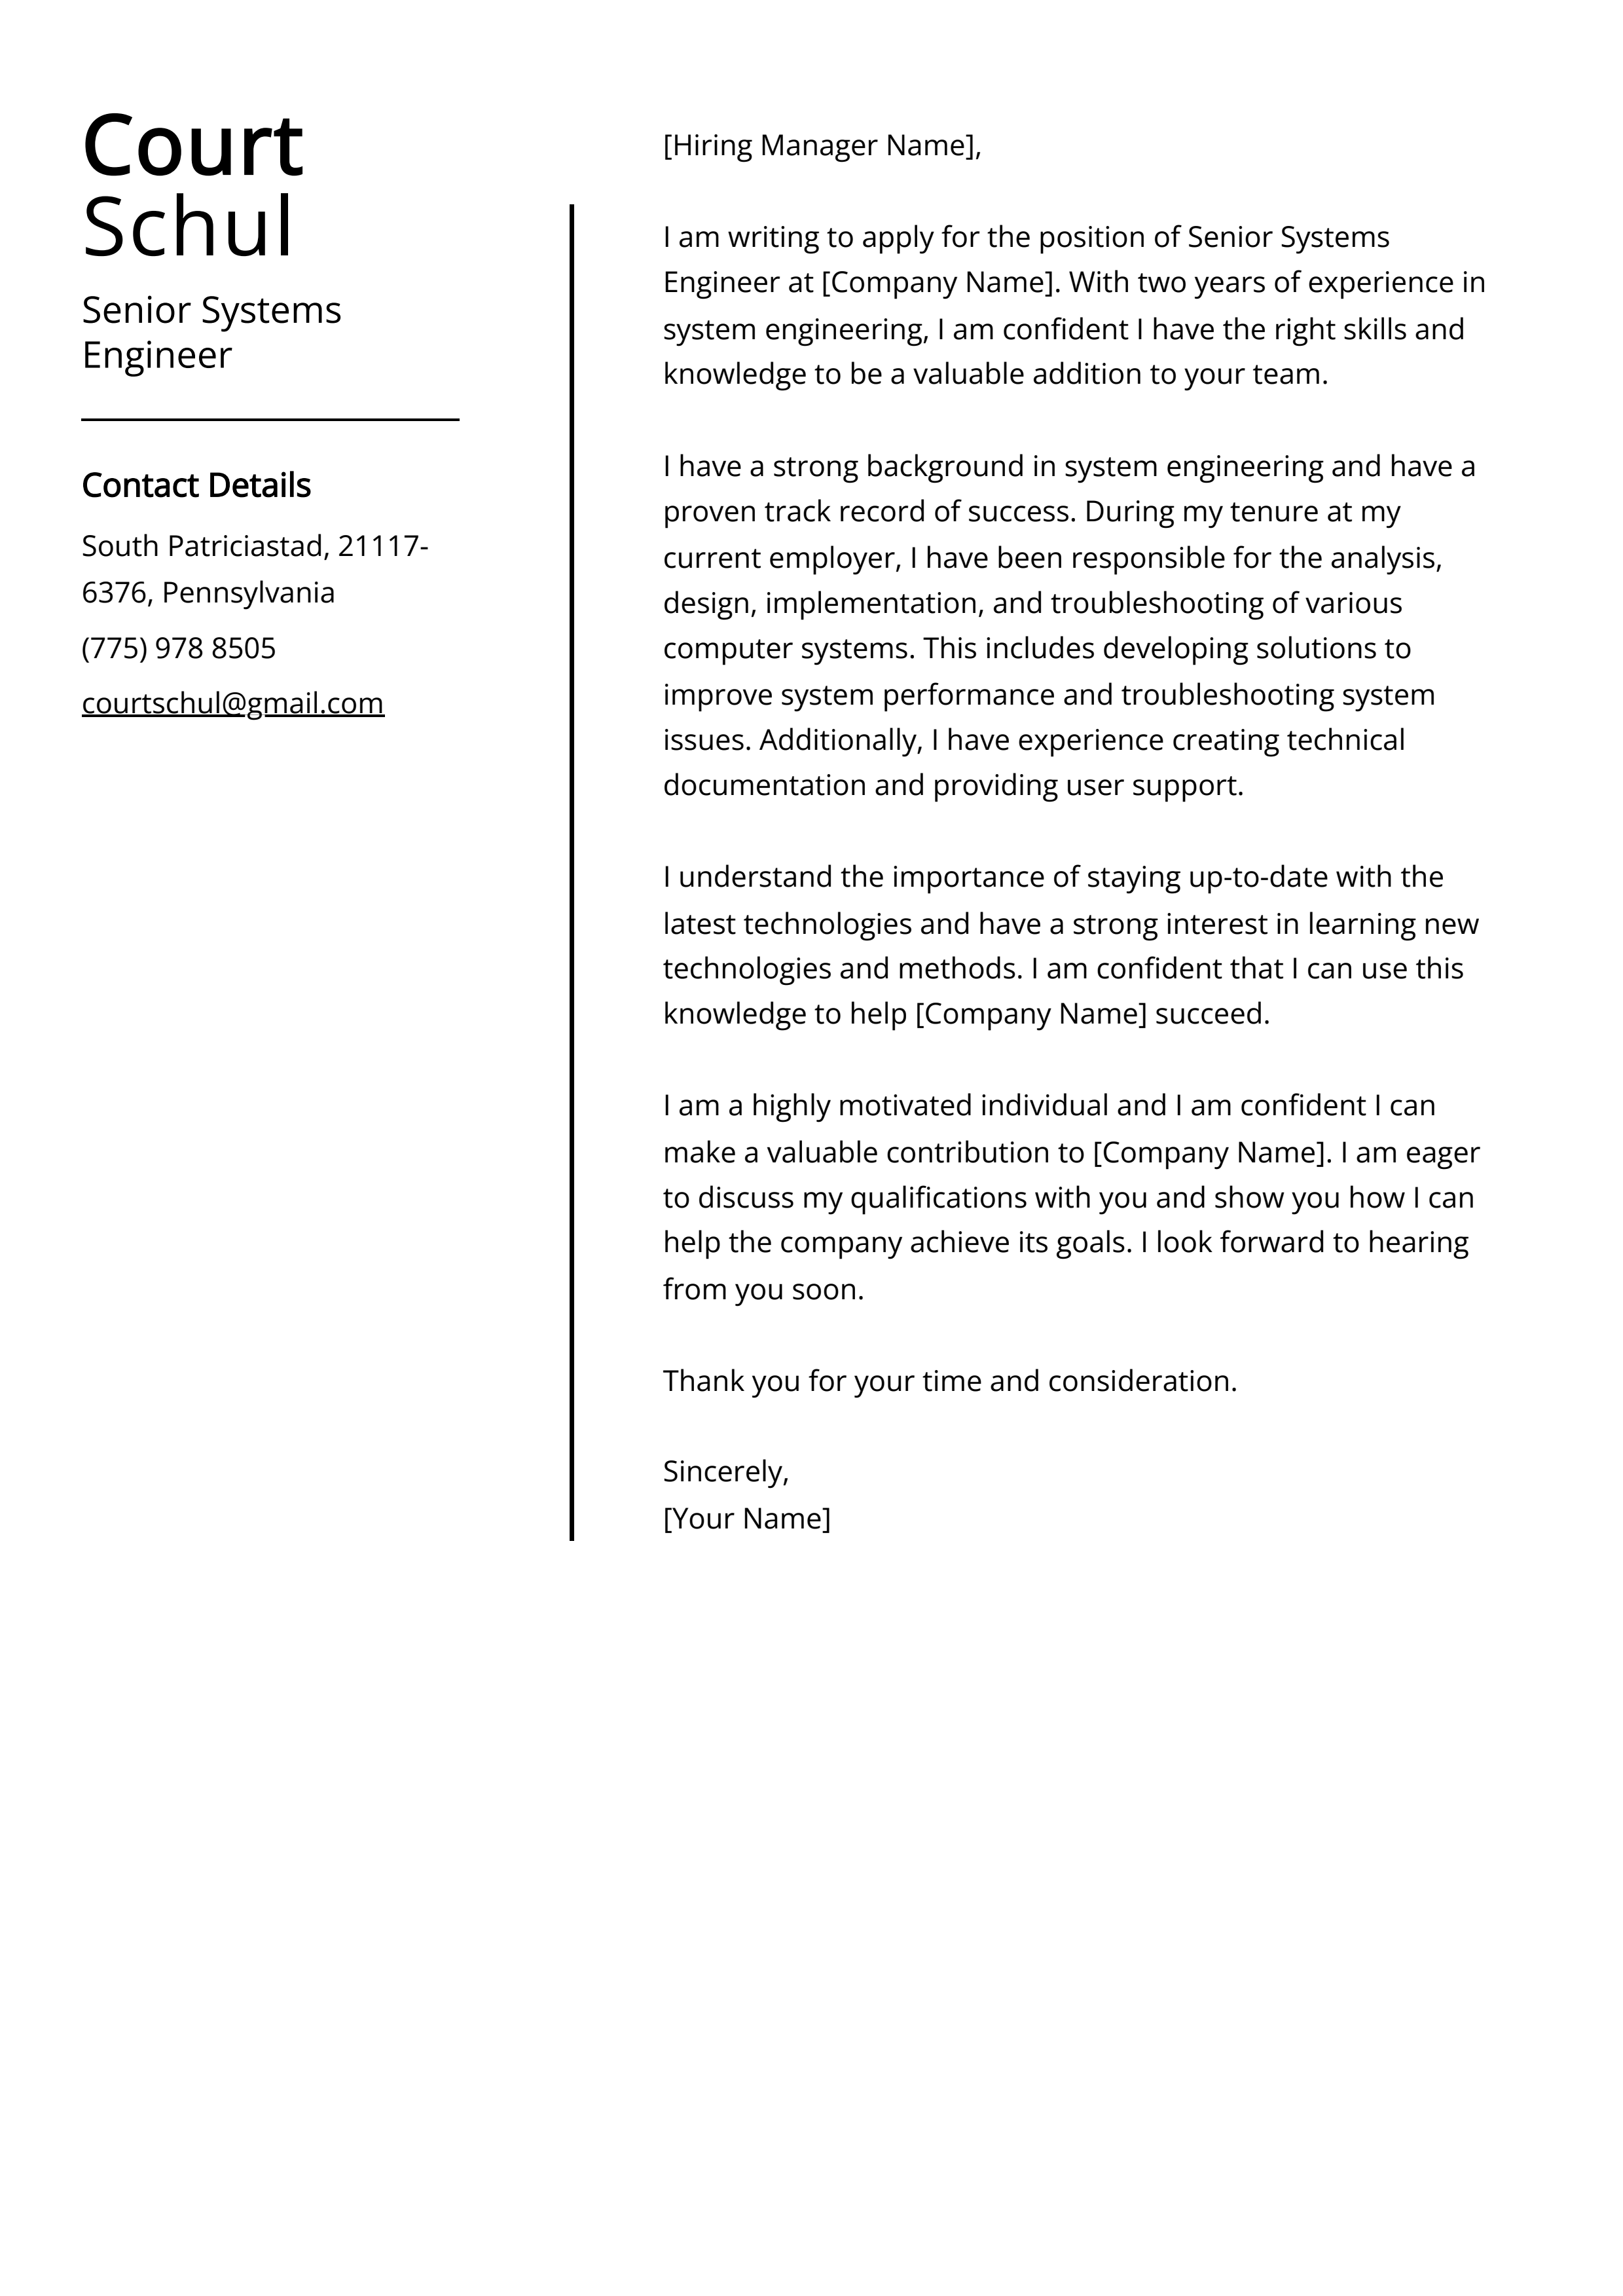 Senior Systems Engineer Cover Letter Example